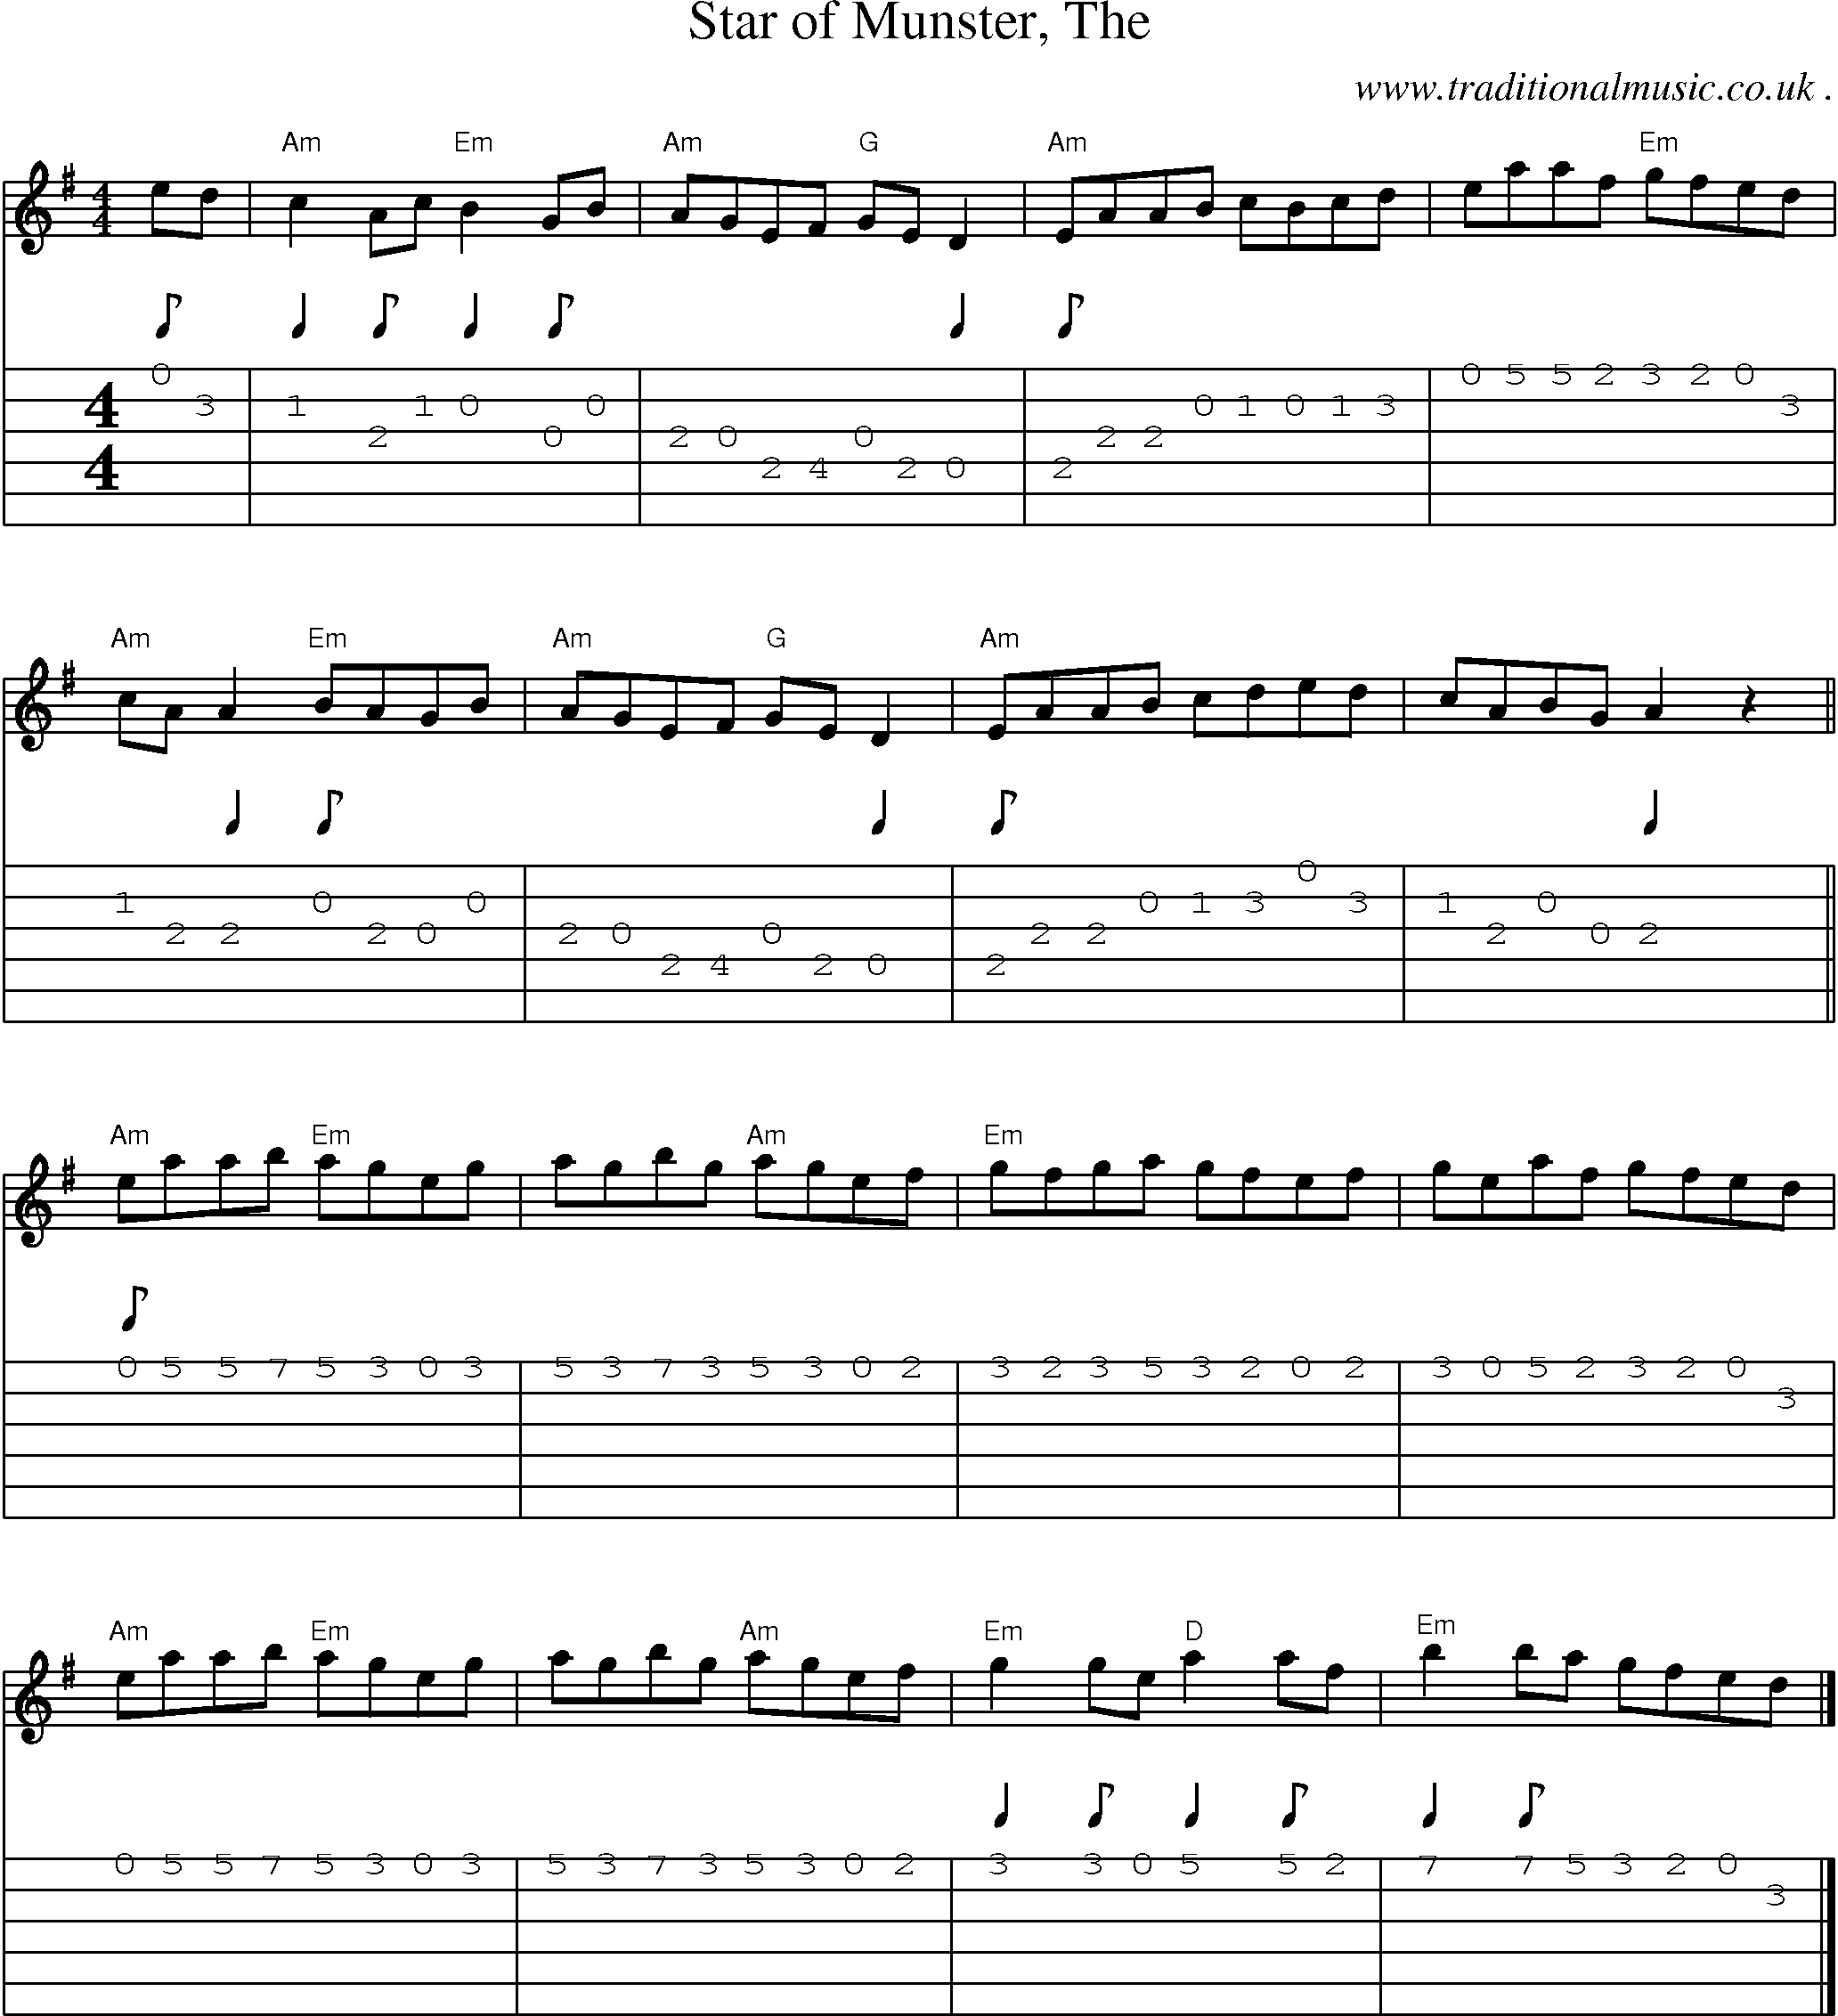 Music Score and Guitar Tabs for Star of Munster The1